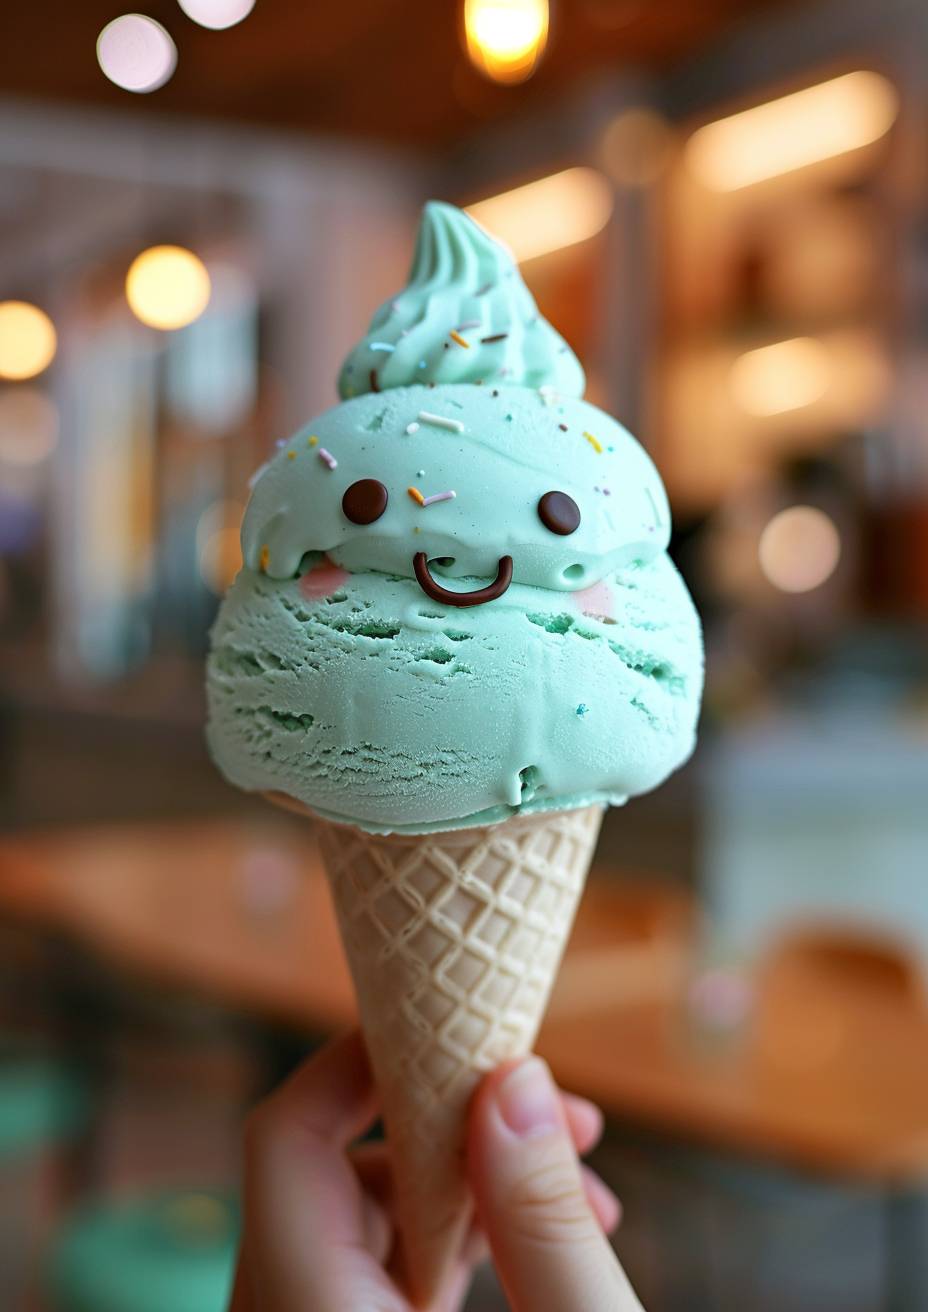 A soft ice cream with a smiley face